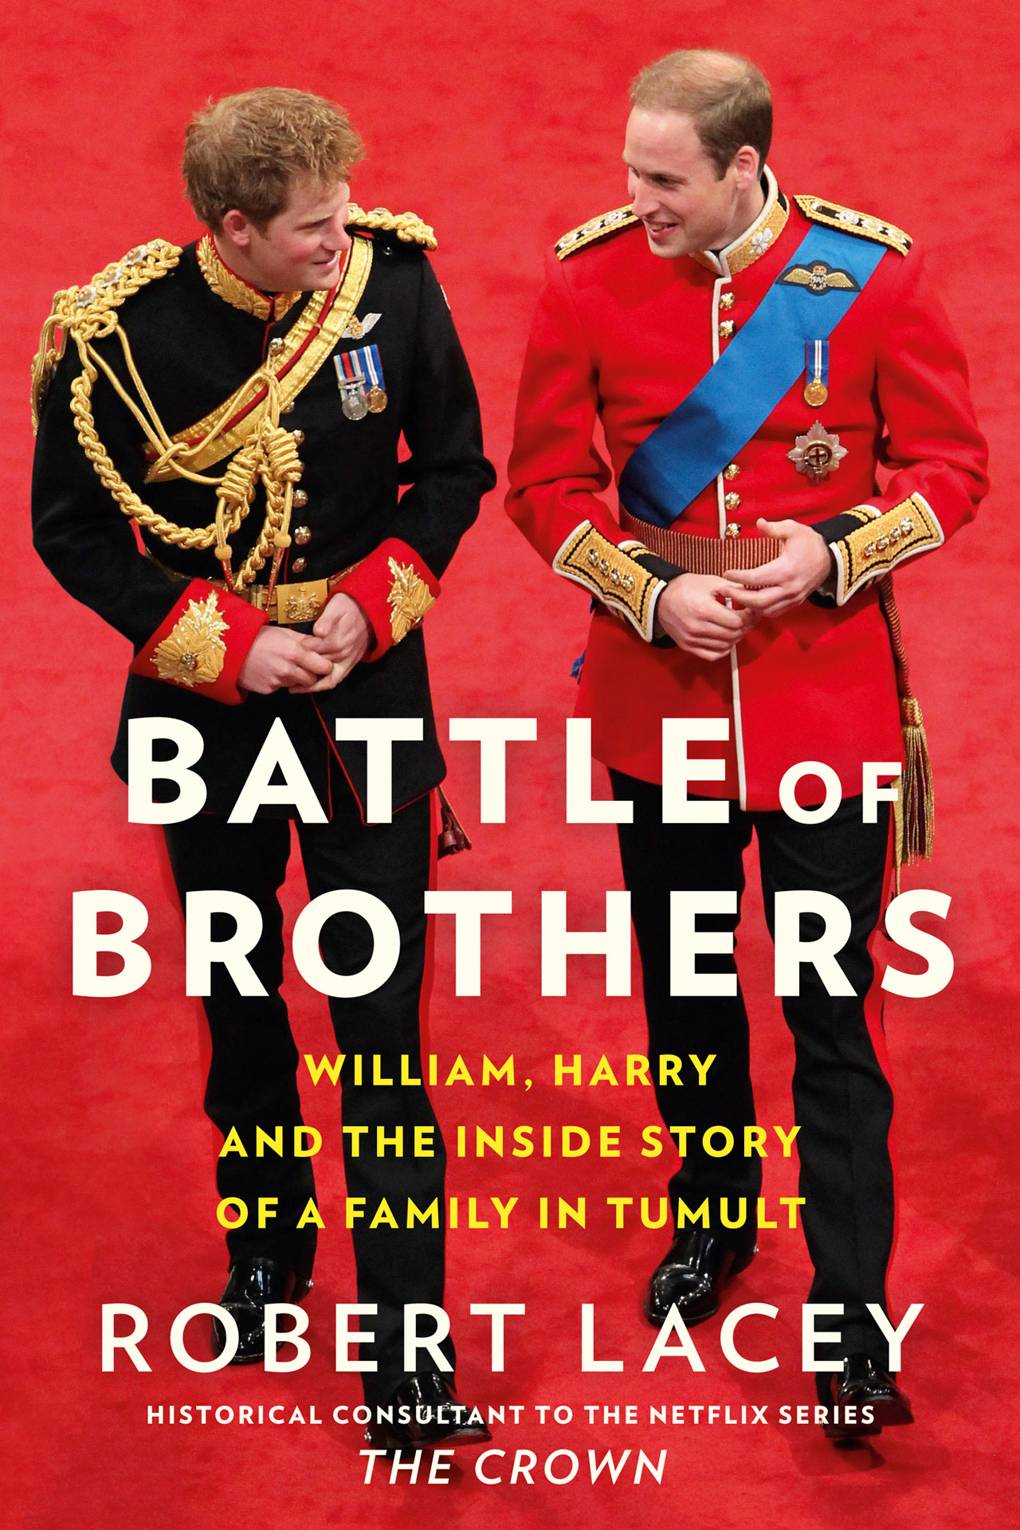 Battle of Brothers by Robert Lacey - Prince William and Prince Harry |  Tatler